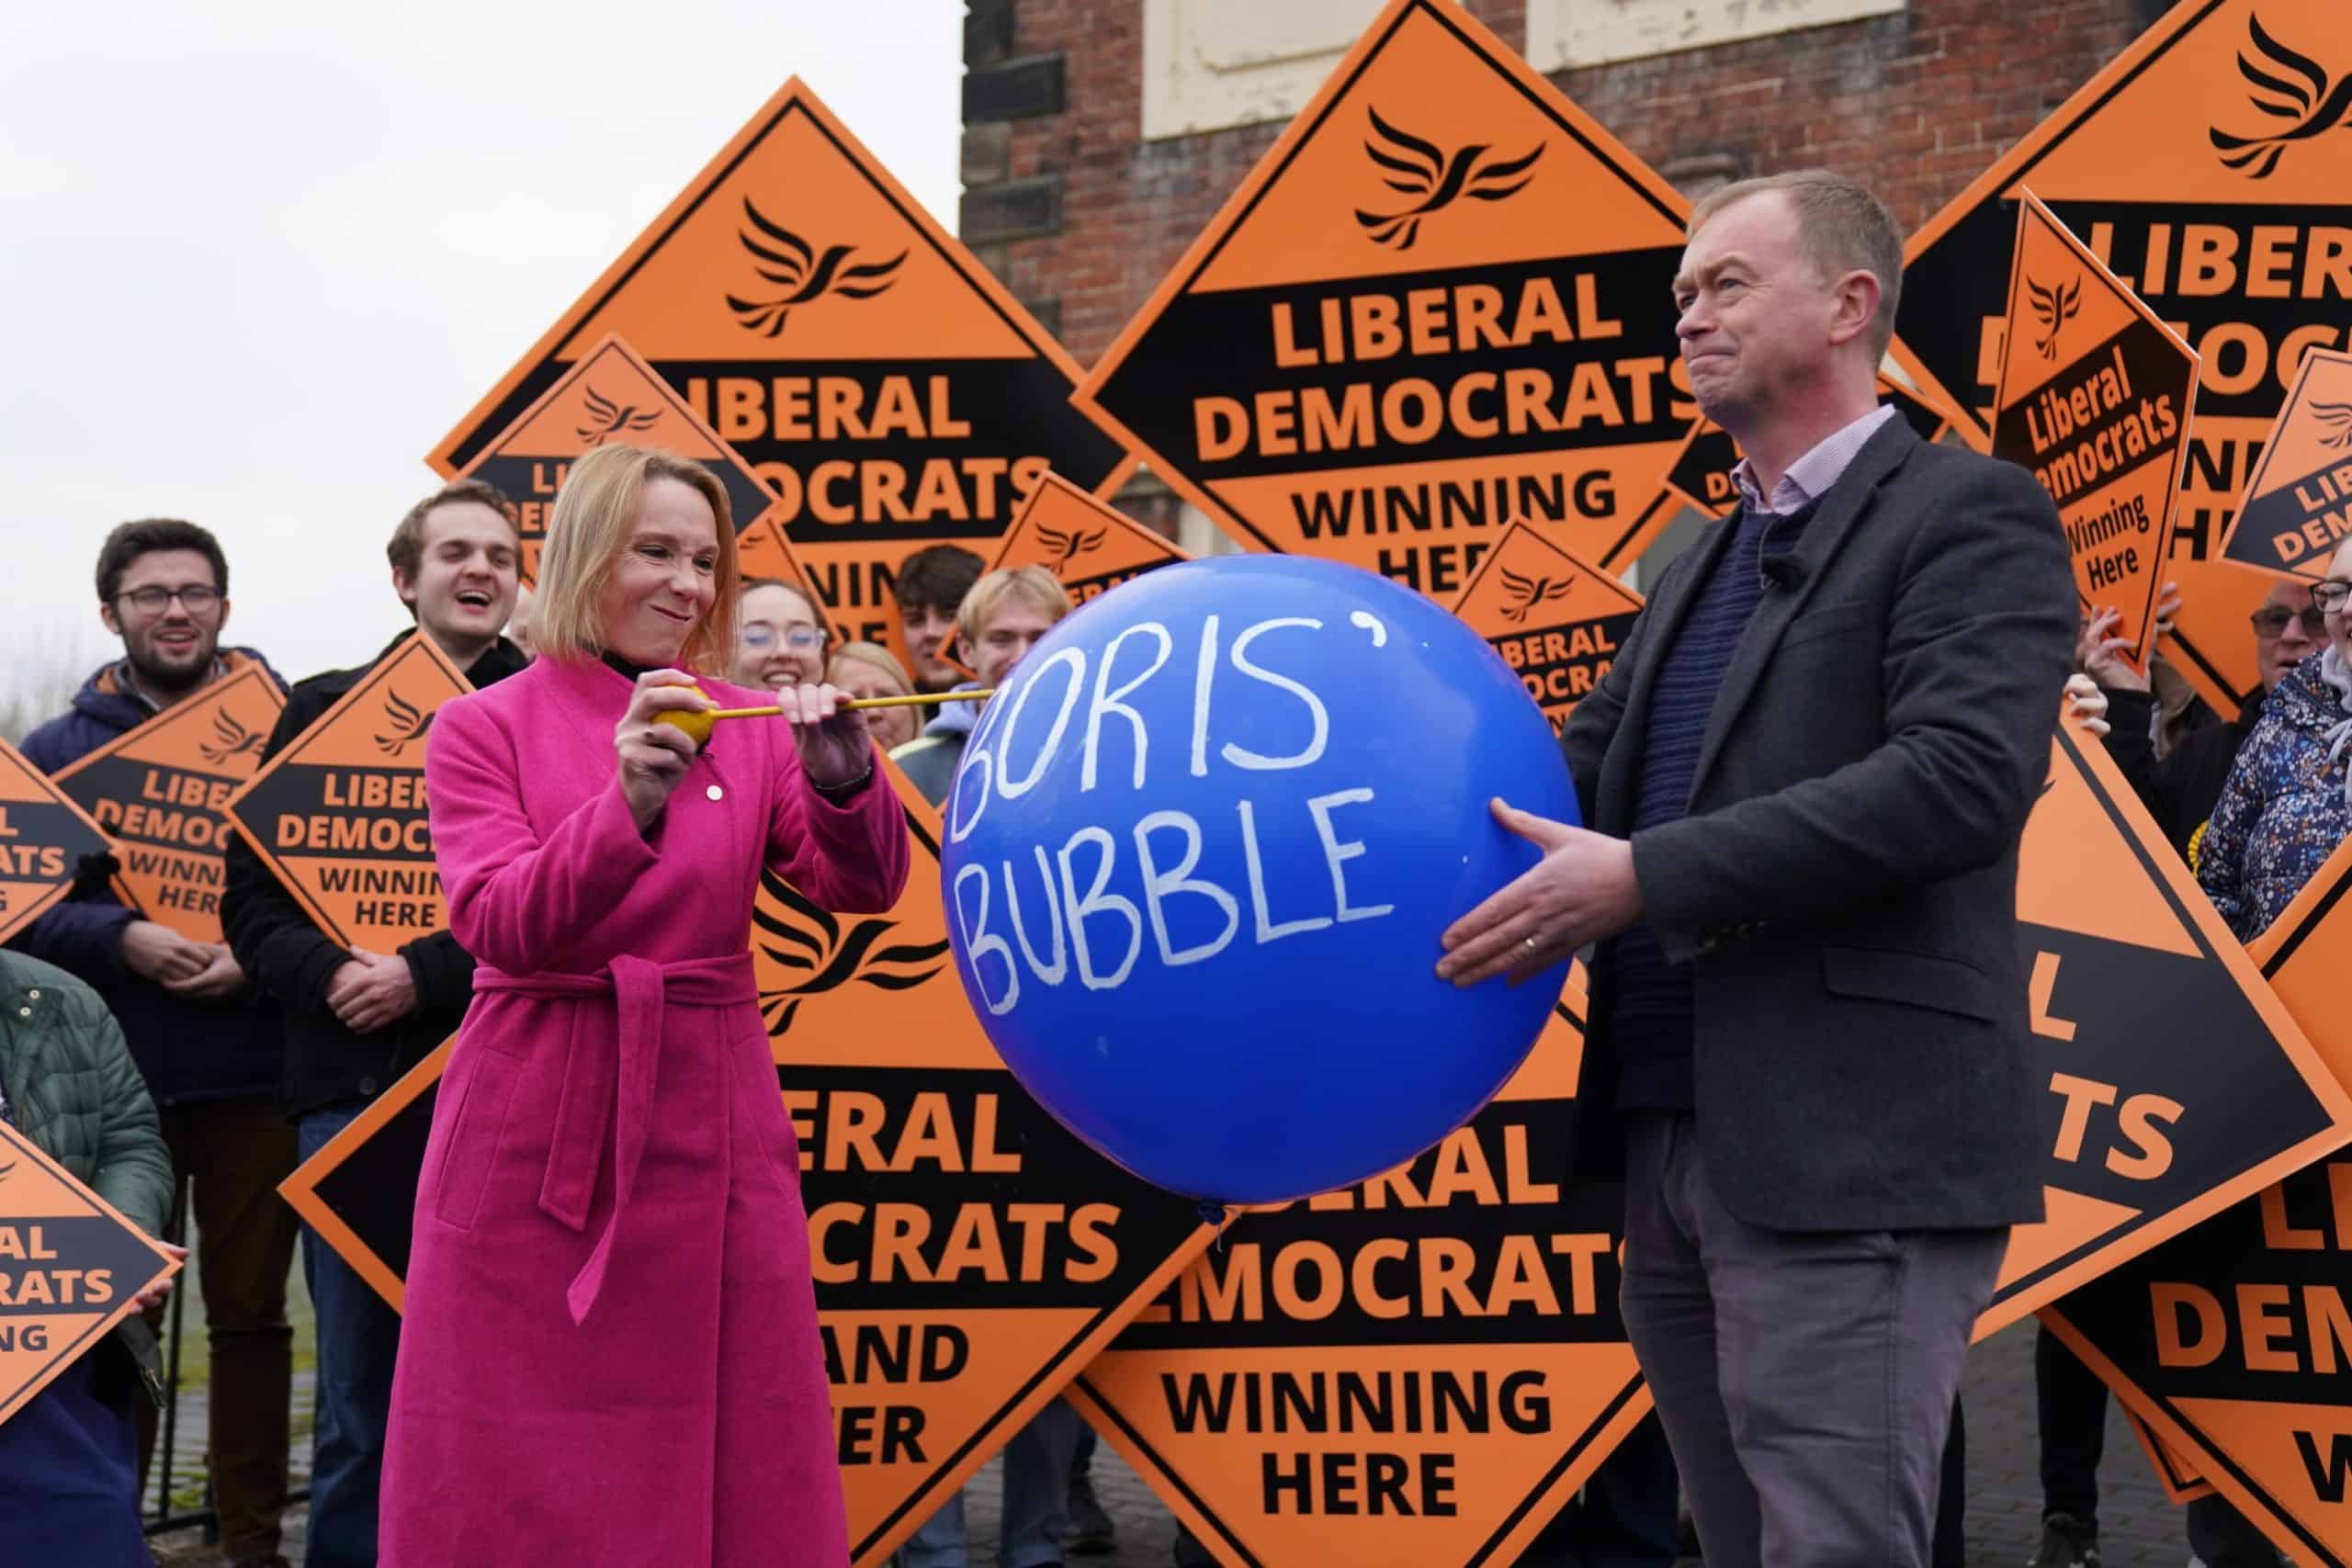 Watch: Lib Dems might have won byelection but celebration is cringetastic